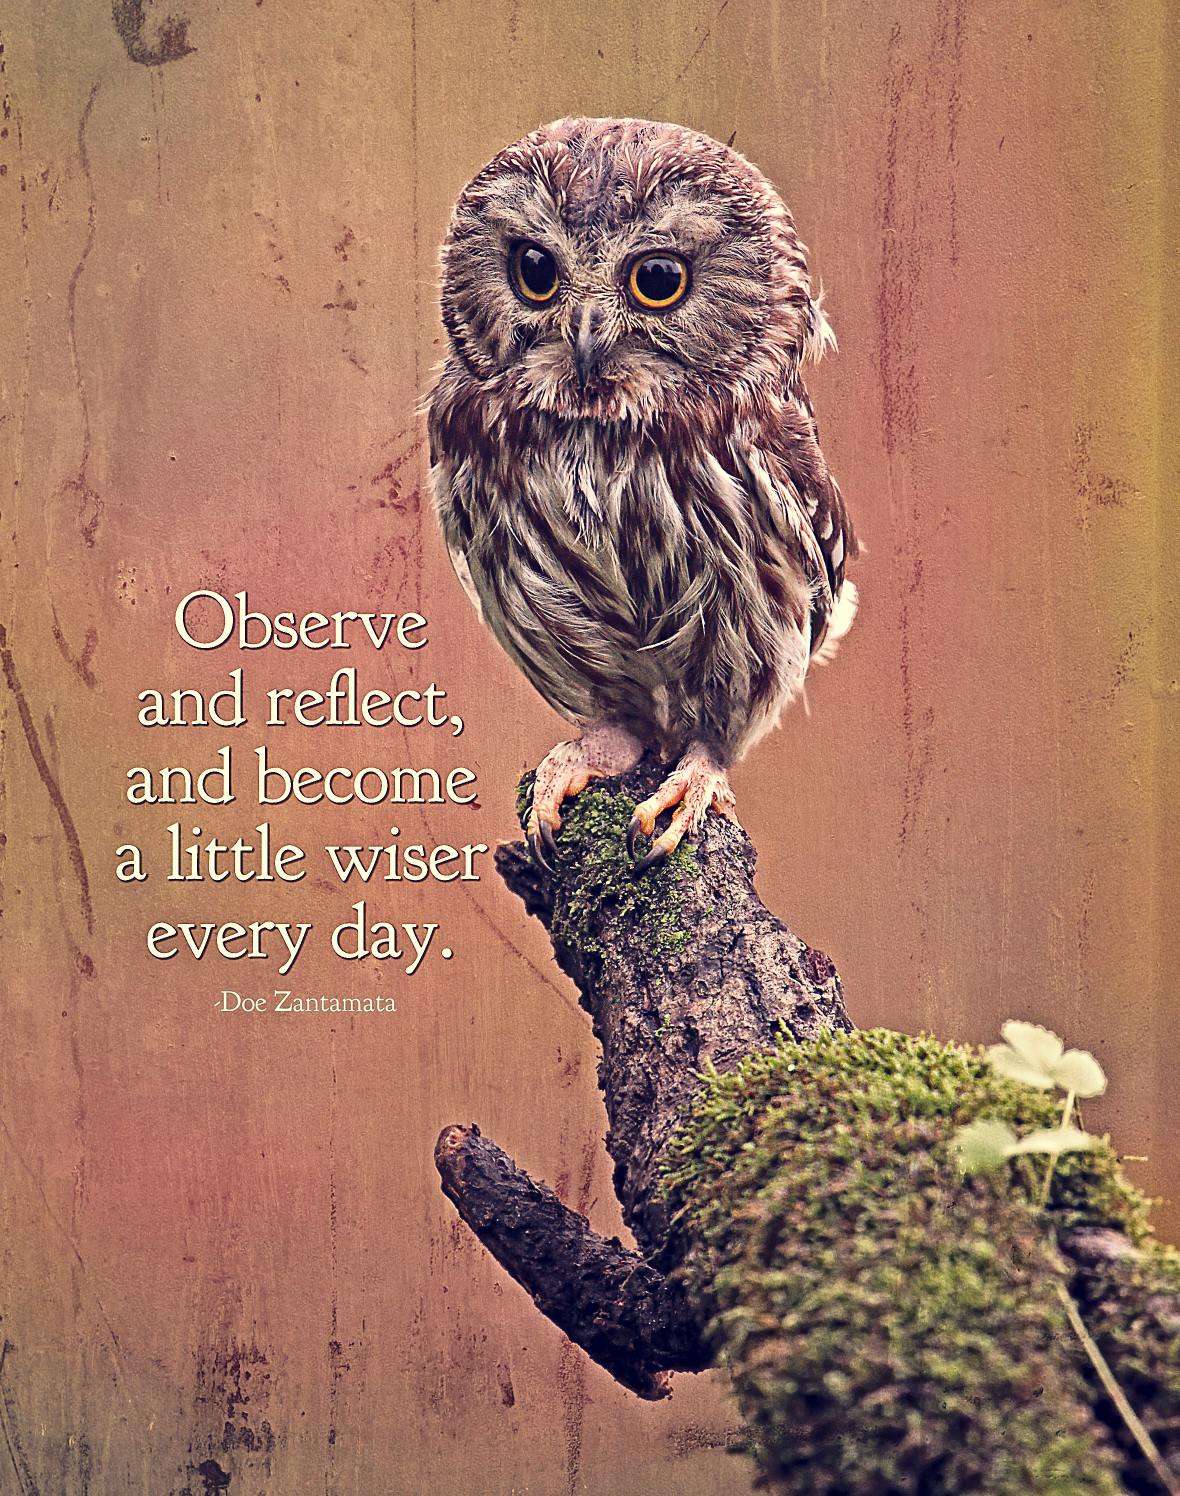 Observe and Reflect - Signed Inspirational Metallic Photo Print 8x10